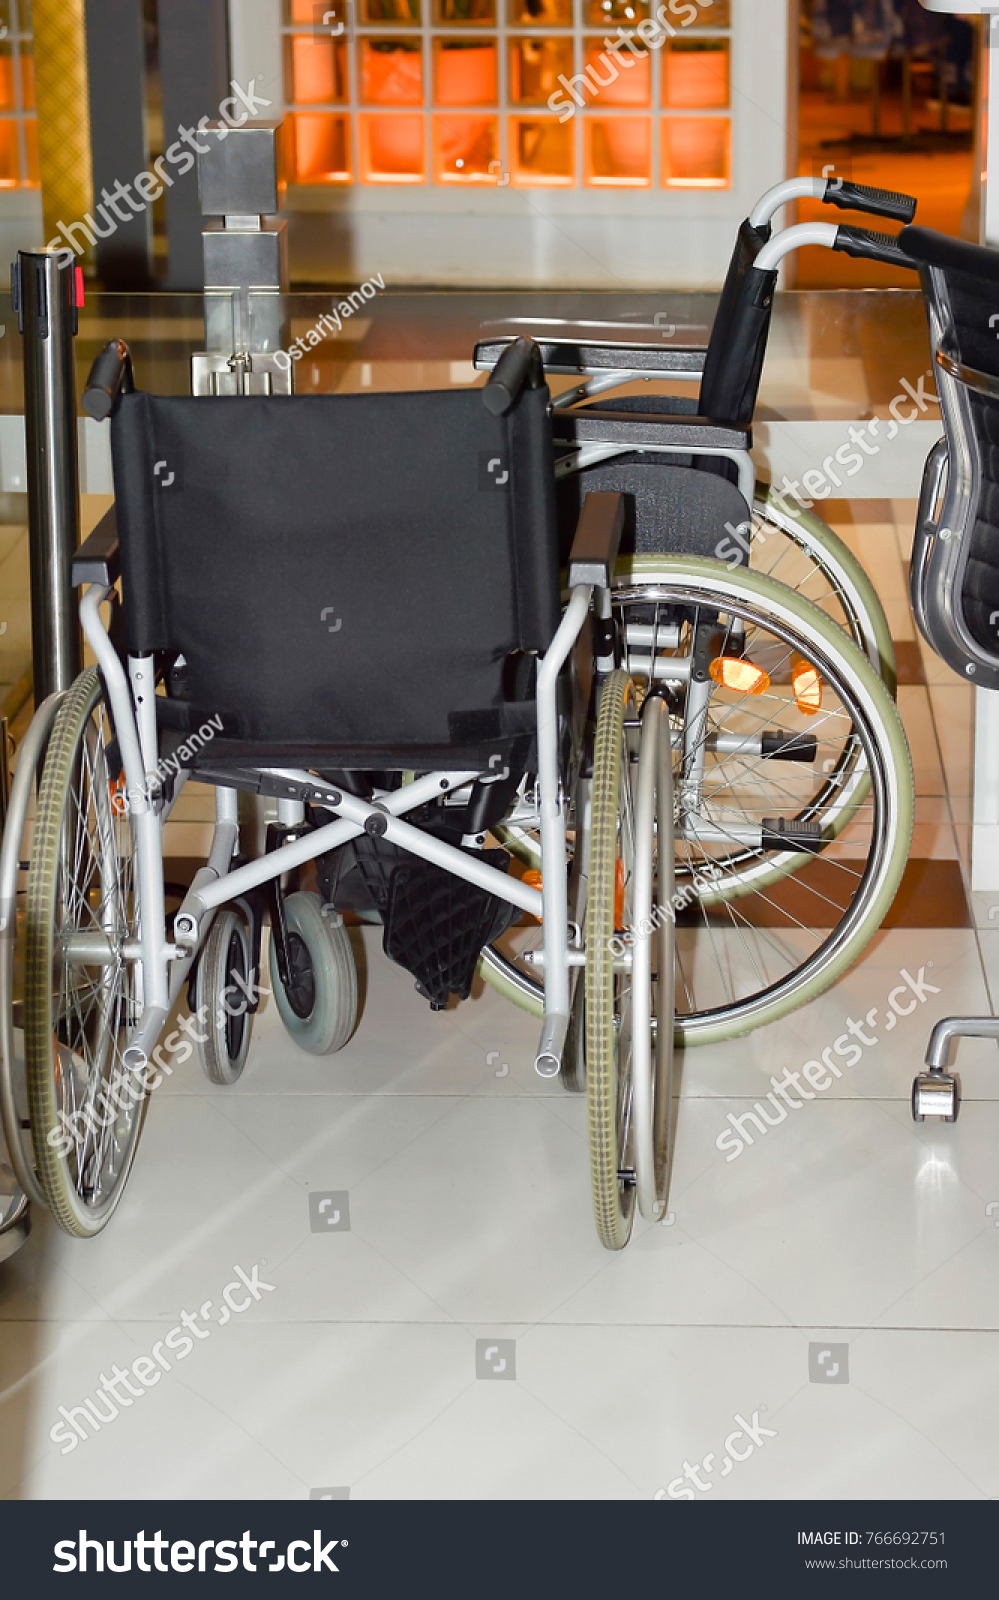 wheelchair for sale in store